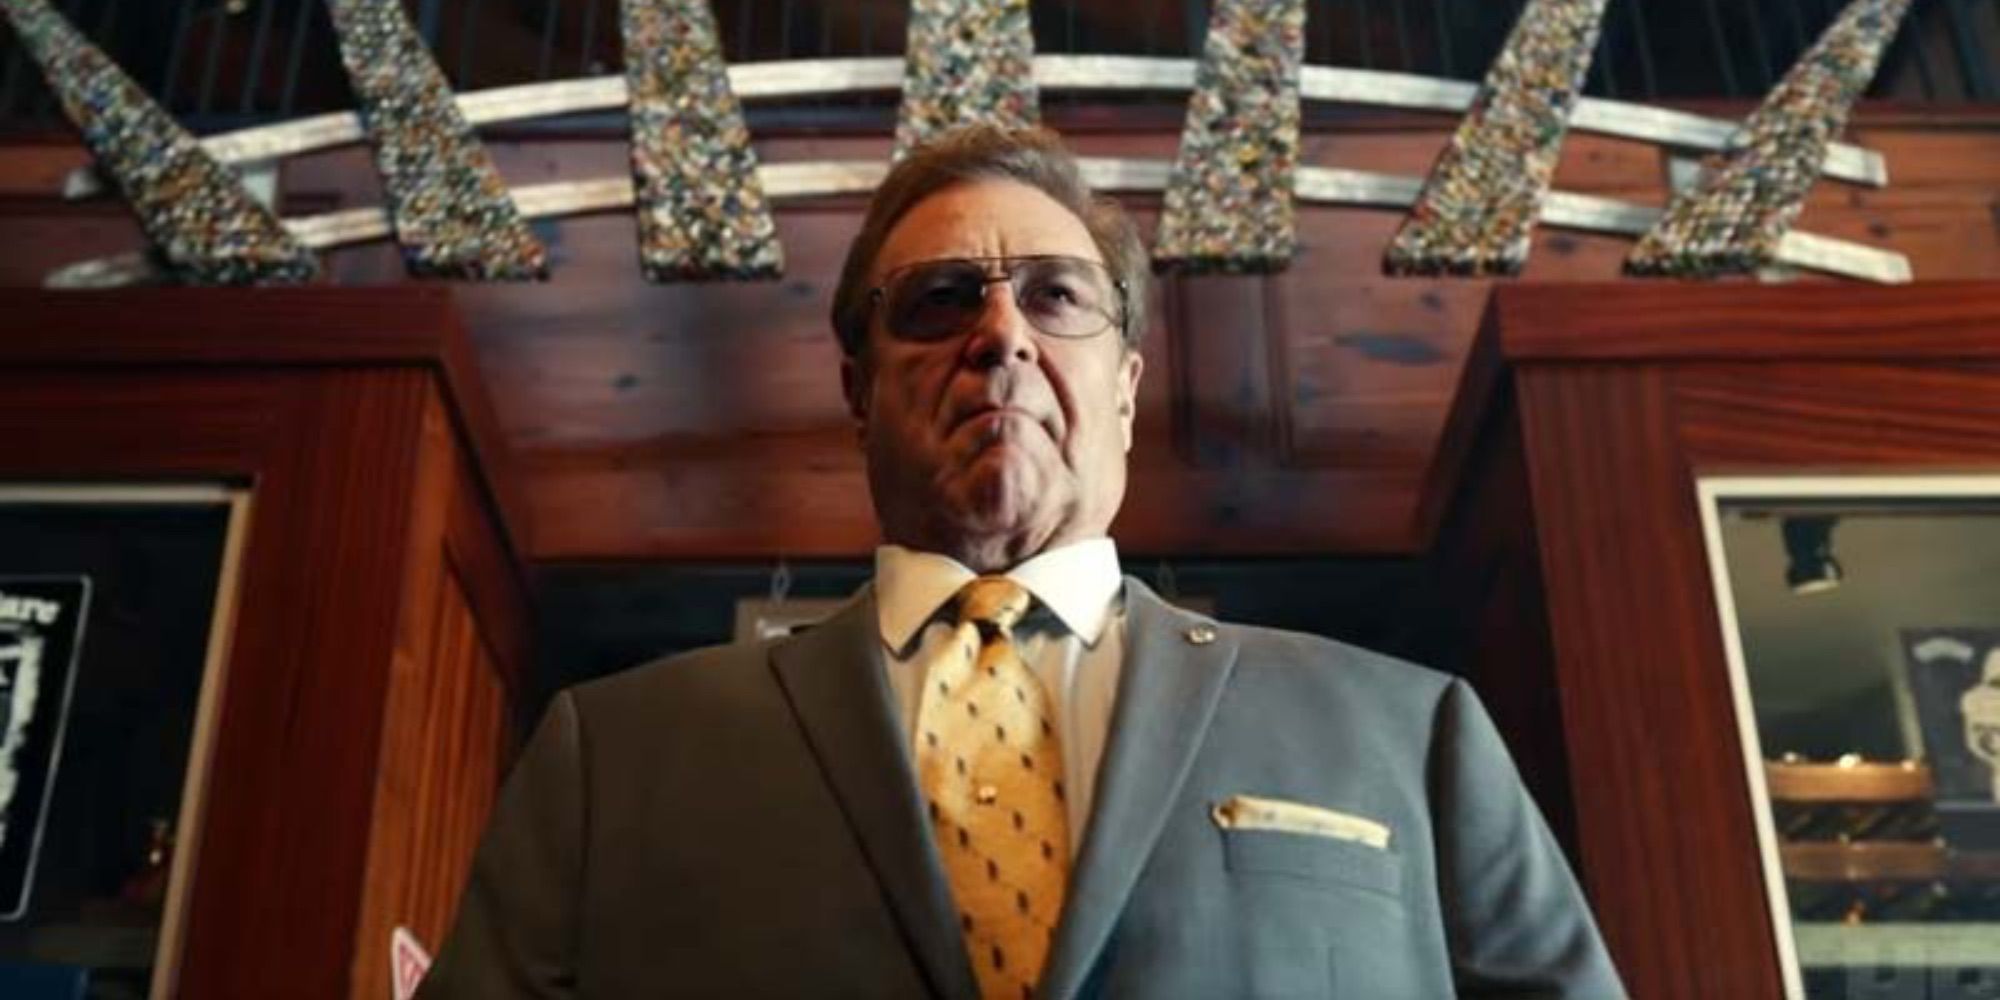 A low down angle view of John Goodman in The Righteous Gemstones, wearing a suit and glasses.